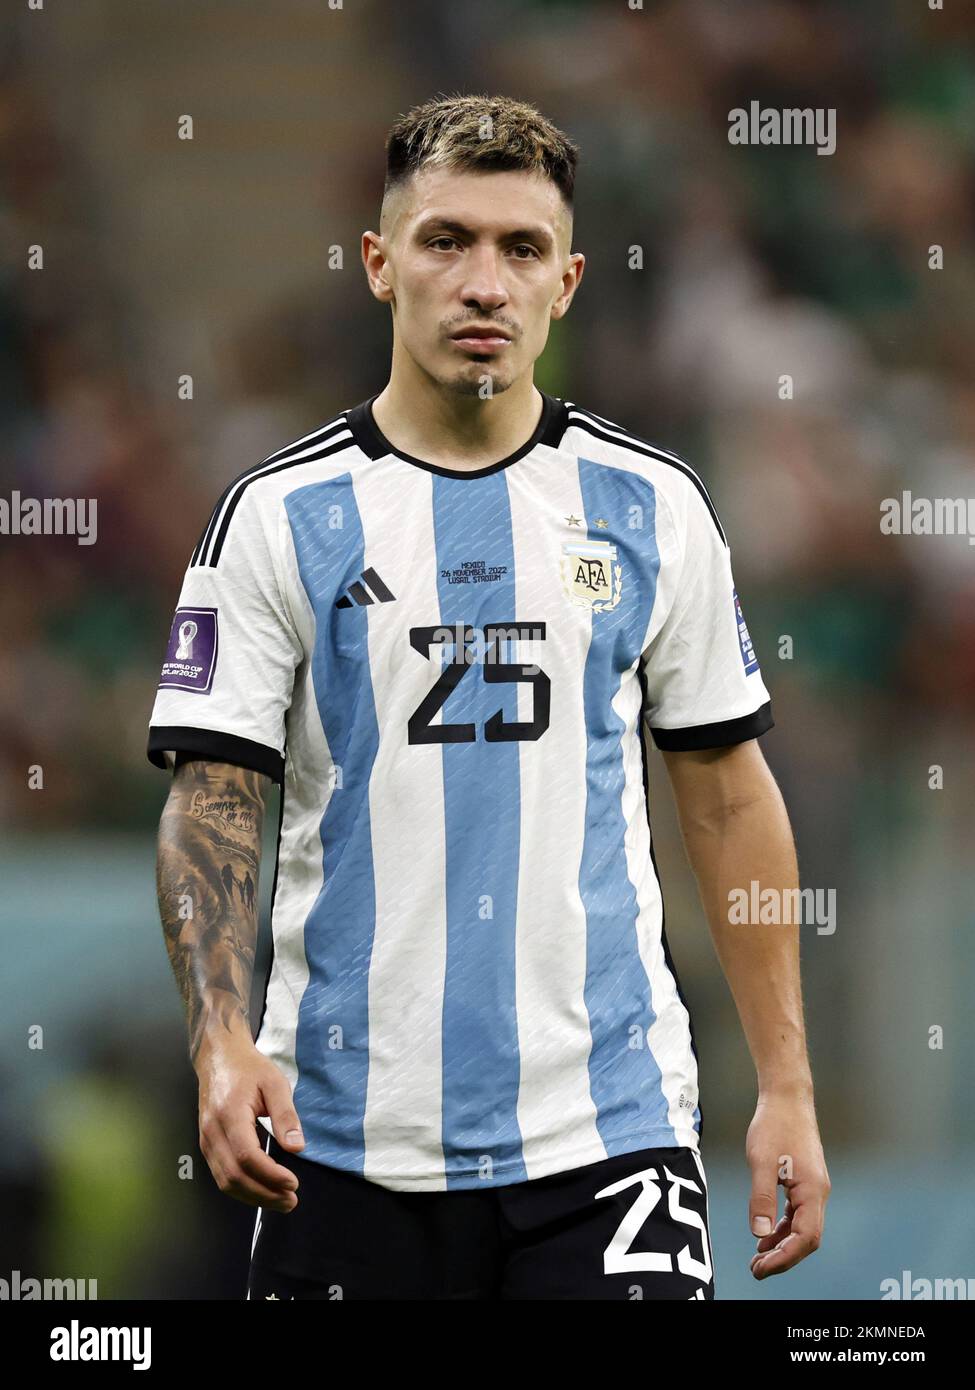 LUSAIL CITY - Lisandro Martinez of Argentina during the FIFA World Cup ...